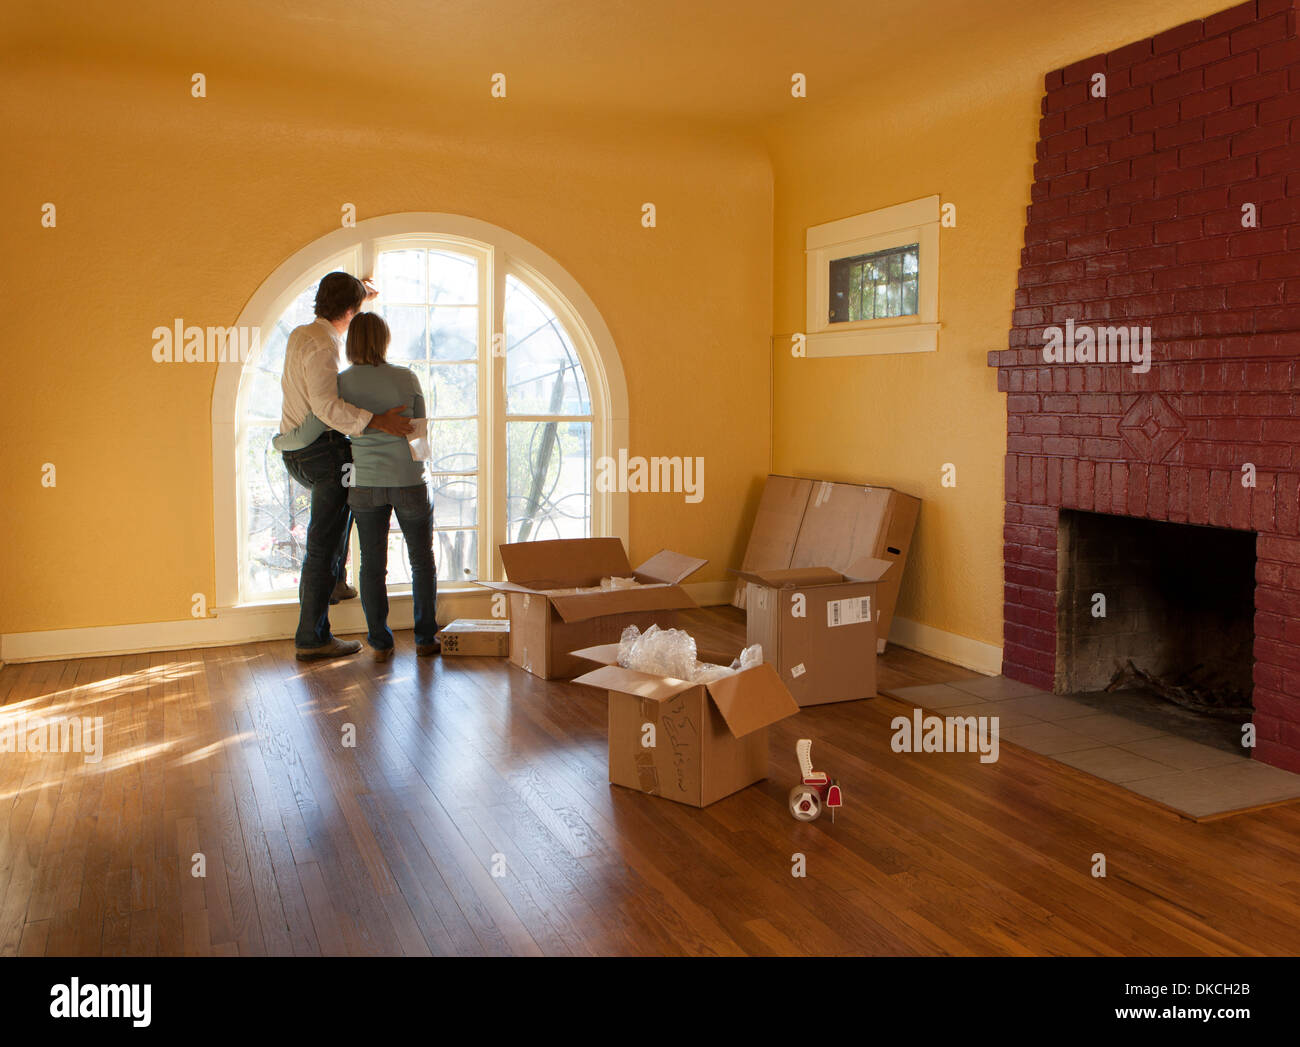 A couple in an empty room in a residential house with cardboard boxes suggesting they are moving in or out. Stock Photo